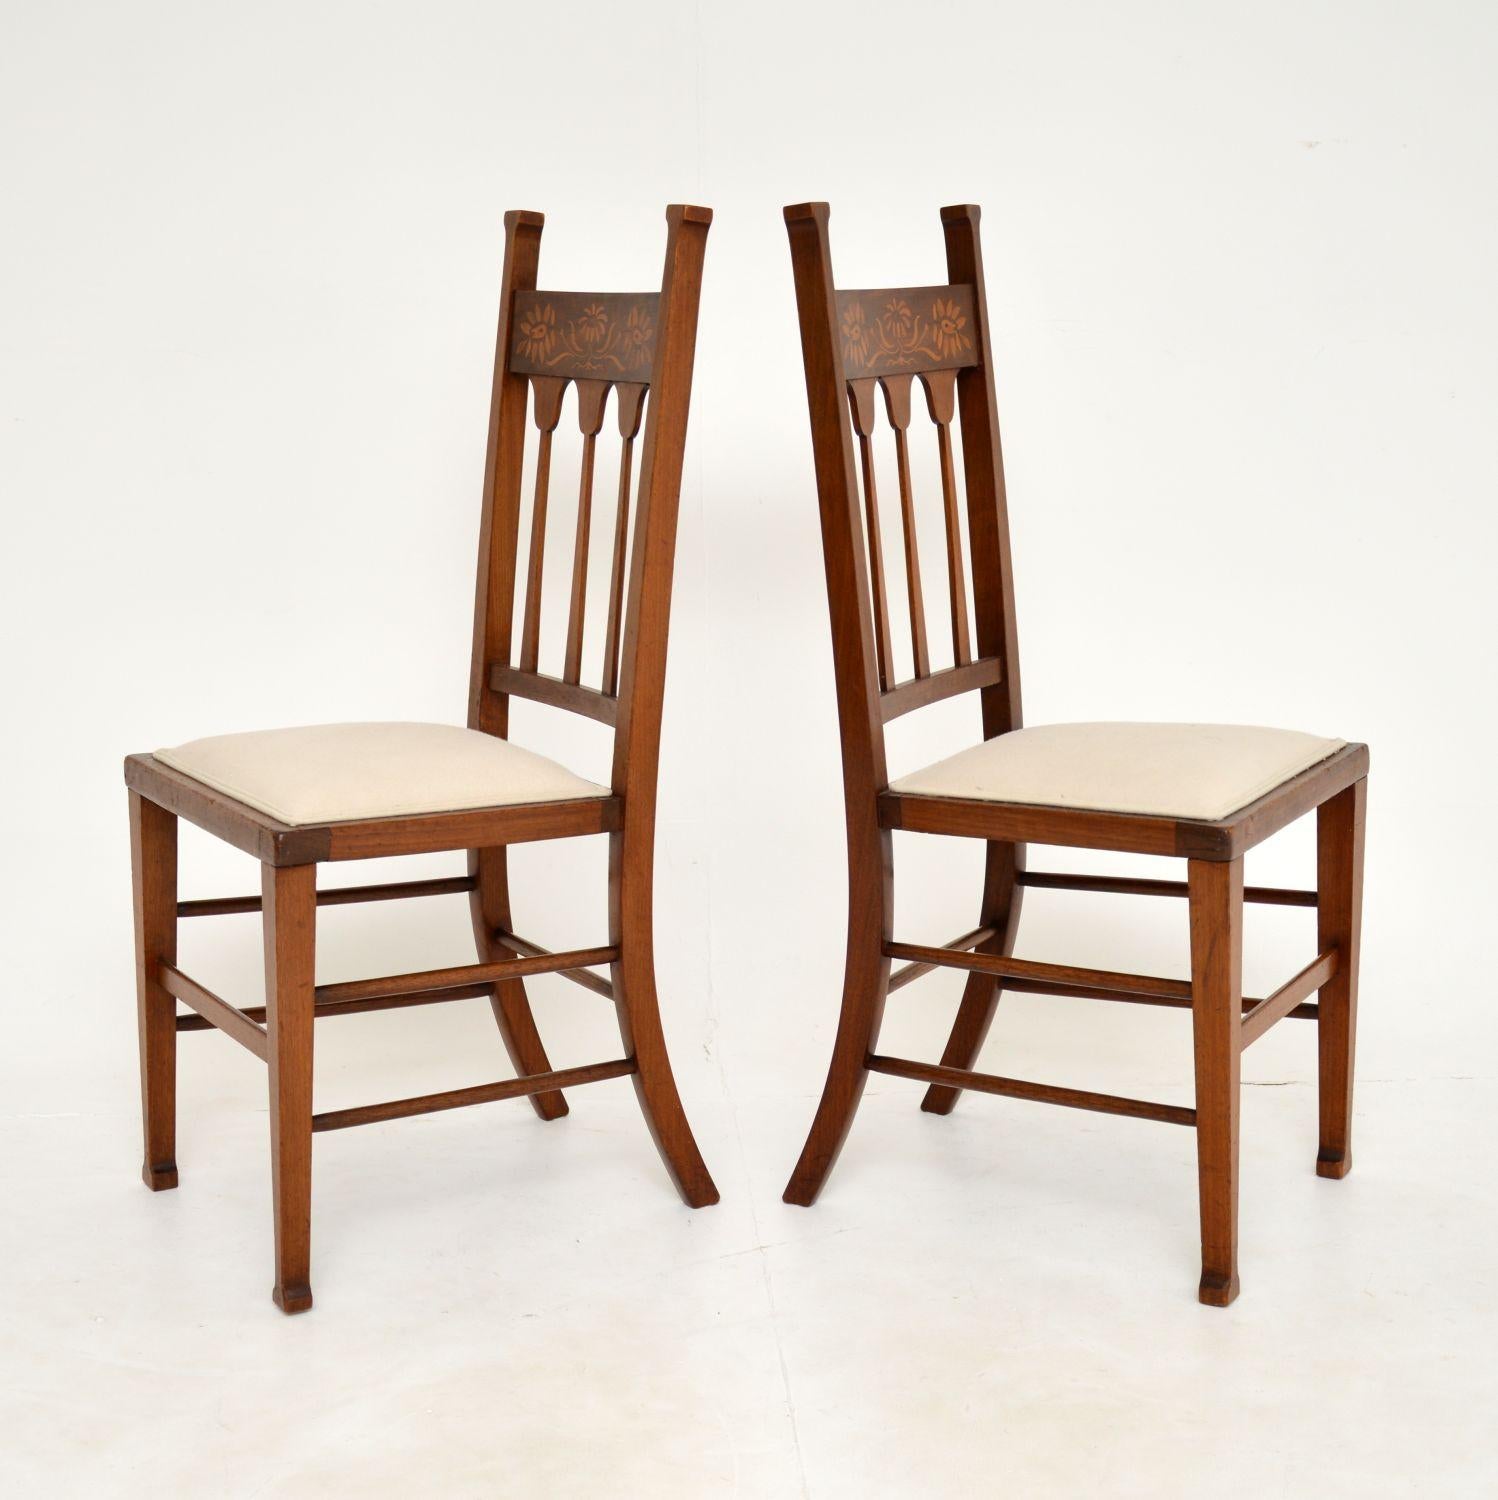 English Pair of Antique Inlaid Arts & Crafts Side Chairs